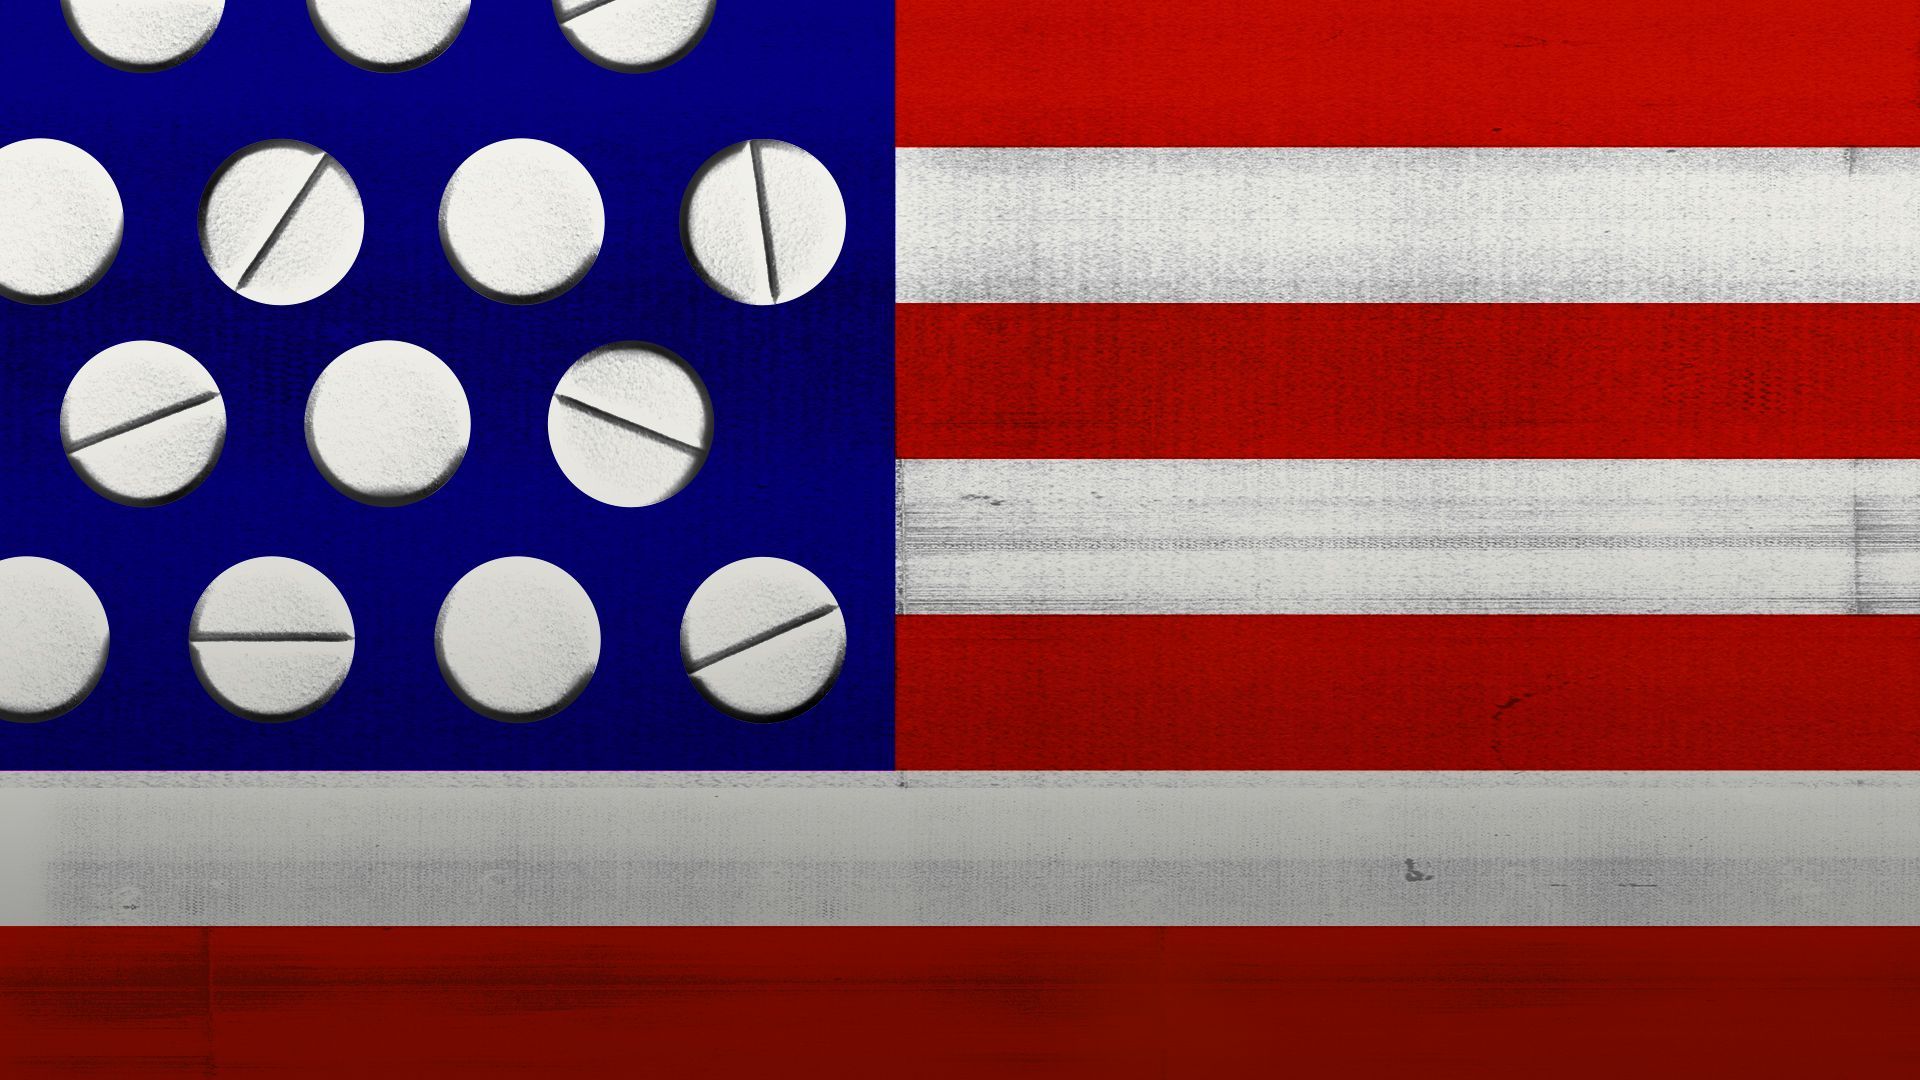 Illustration of the US flag with pills instead of stars.